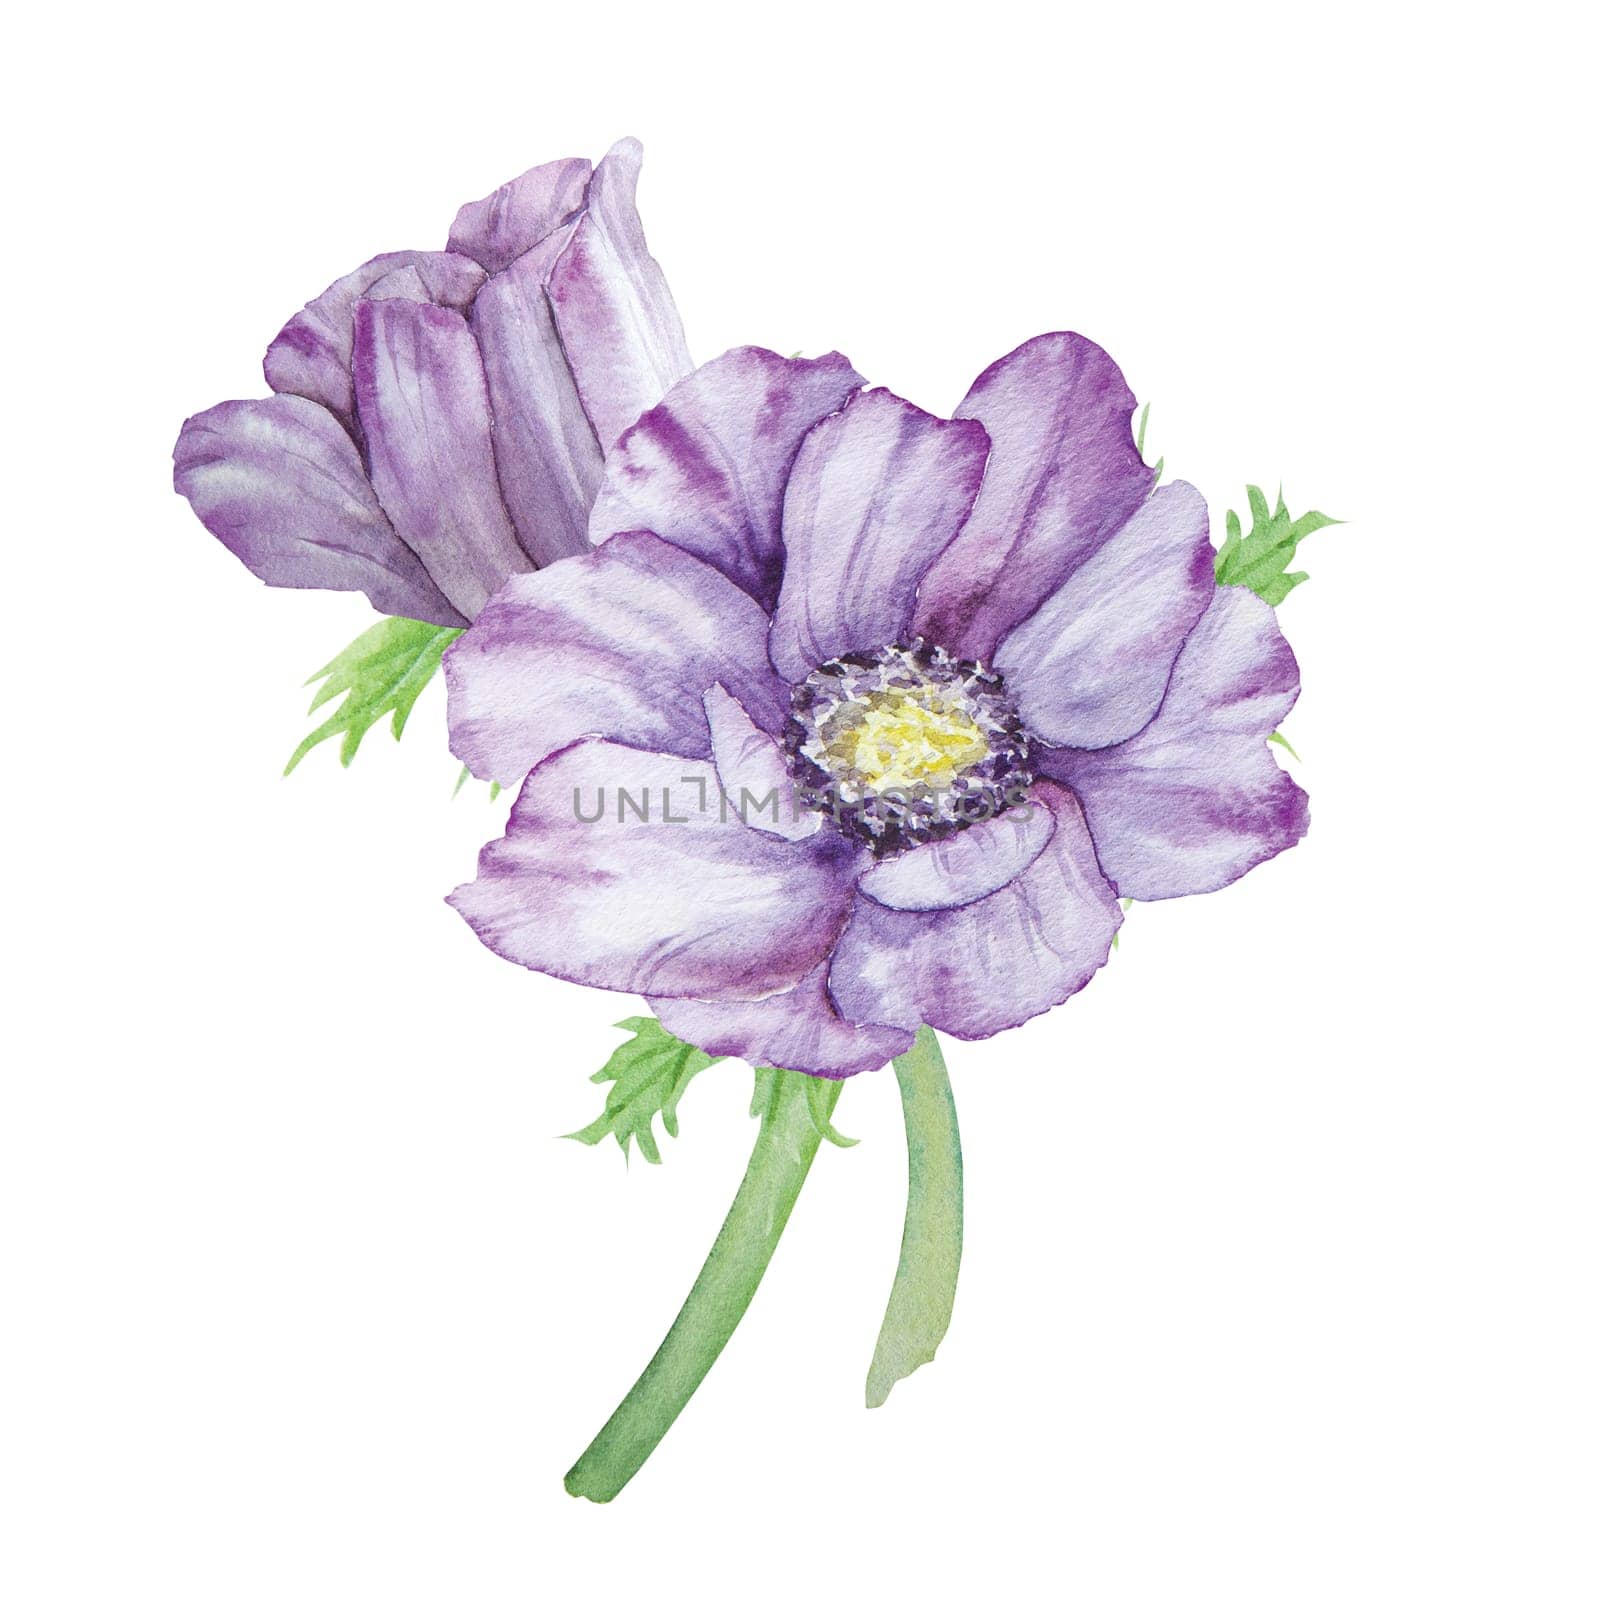 Watercolor hand drawn purple anemones with green leaves isolated on white background. by florainlove_art